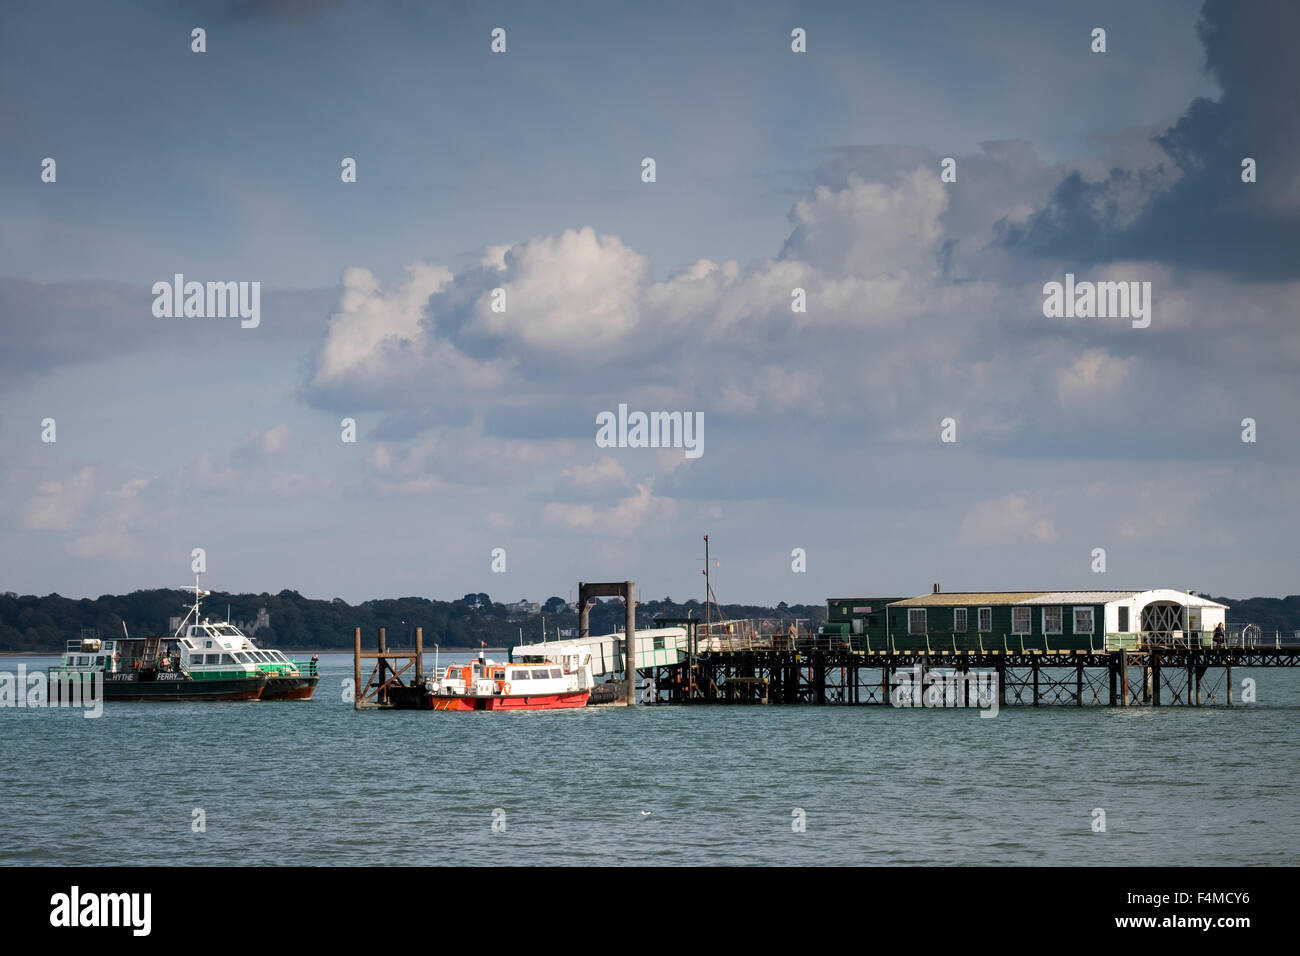 The Hythe Ferry arriving at Hythe Pier in the village of Hythe on the edge of the New Forest, near Southampton Stock Photo